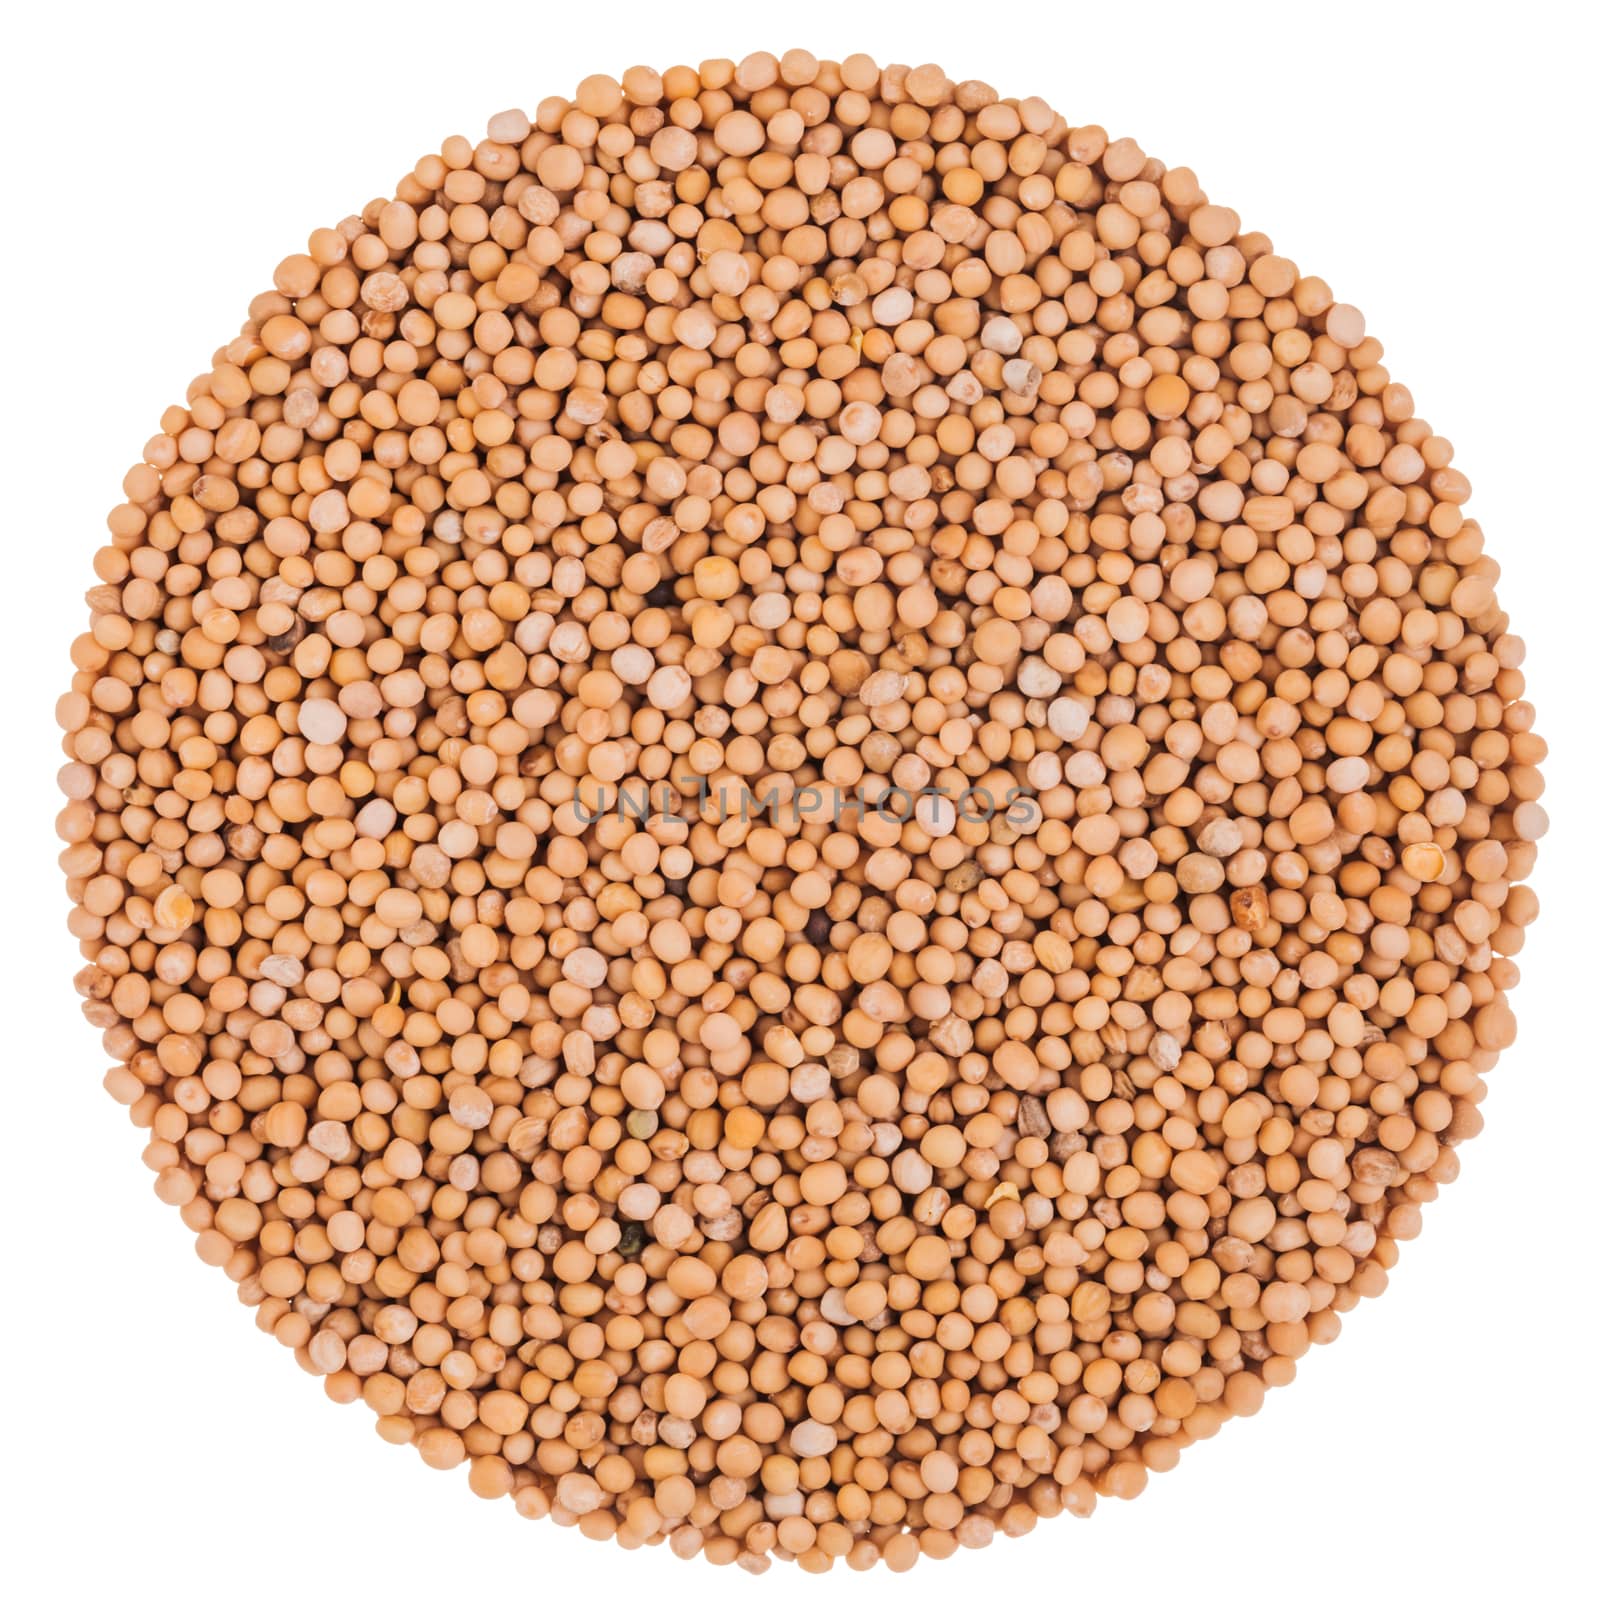 Perfect Circle of Mustard Seeds Isolated on White Background